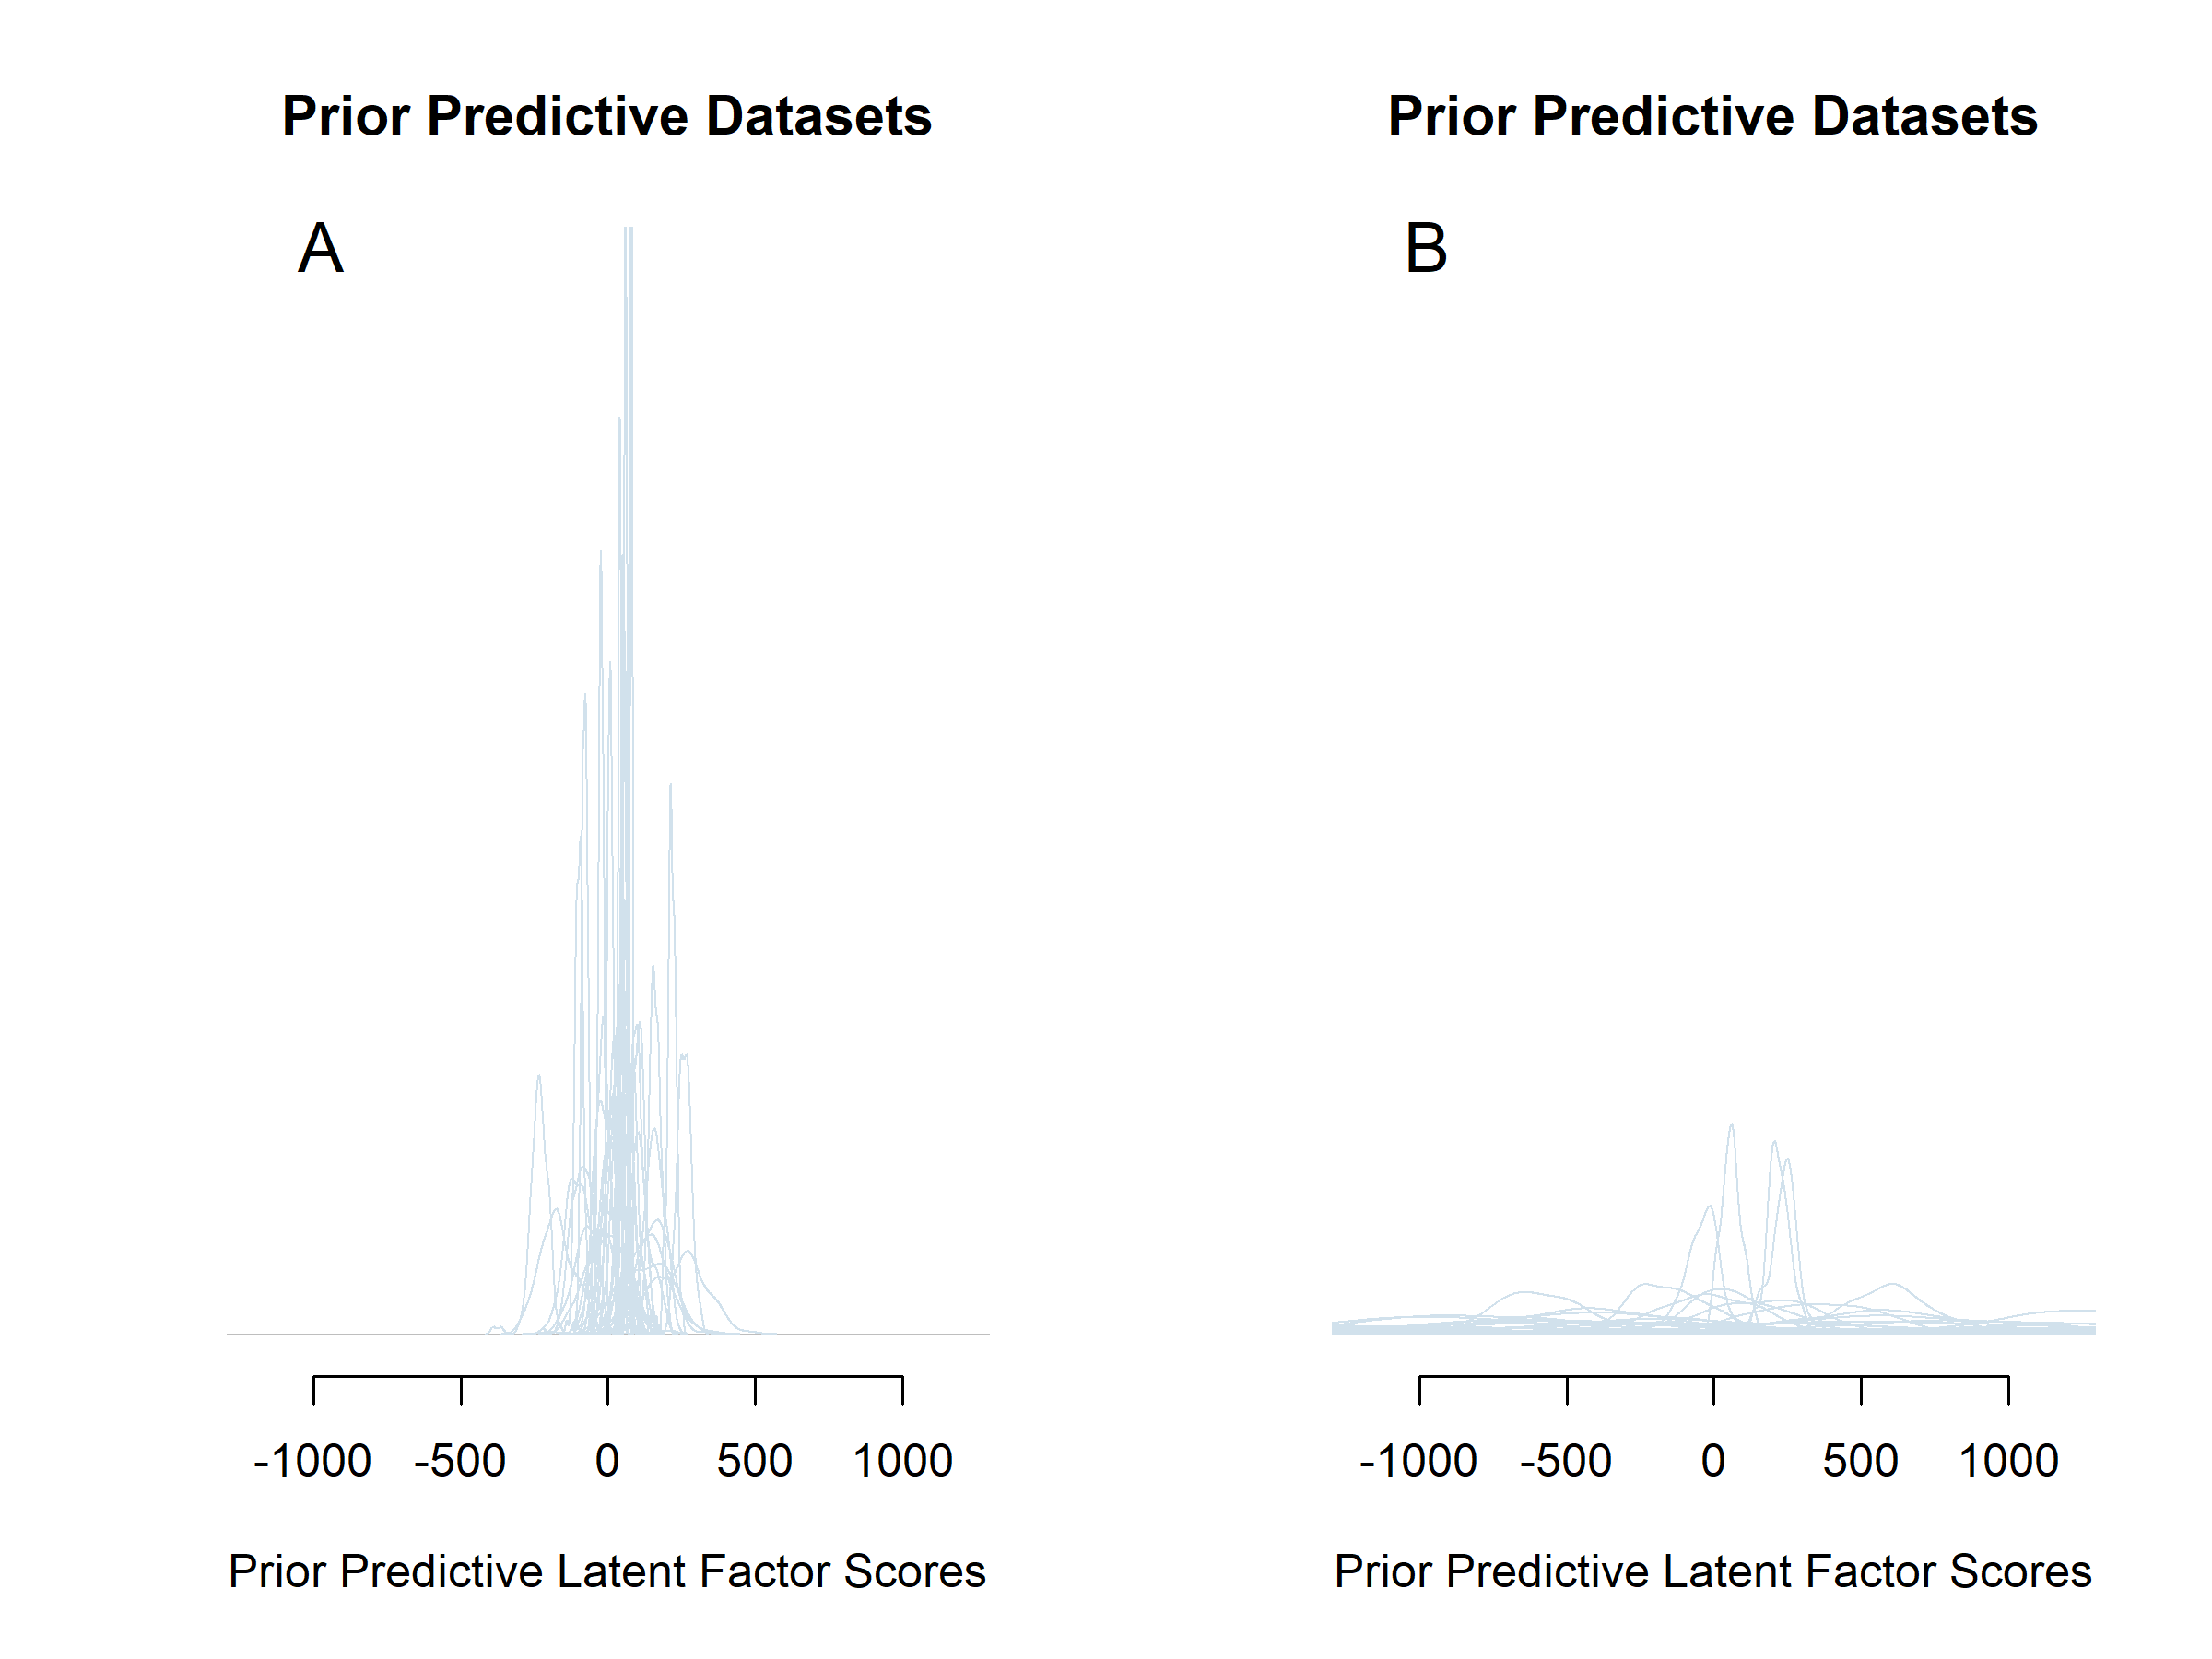 The effect of changing a single prior in the model specification on the prior predictive distributions of the Latent Factor Scores. The prior for $\beta_1$ is changed from weakly informative (panel A; $N(0,4)$) to uninformative (panel B; $N(0,2500)$). 